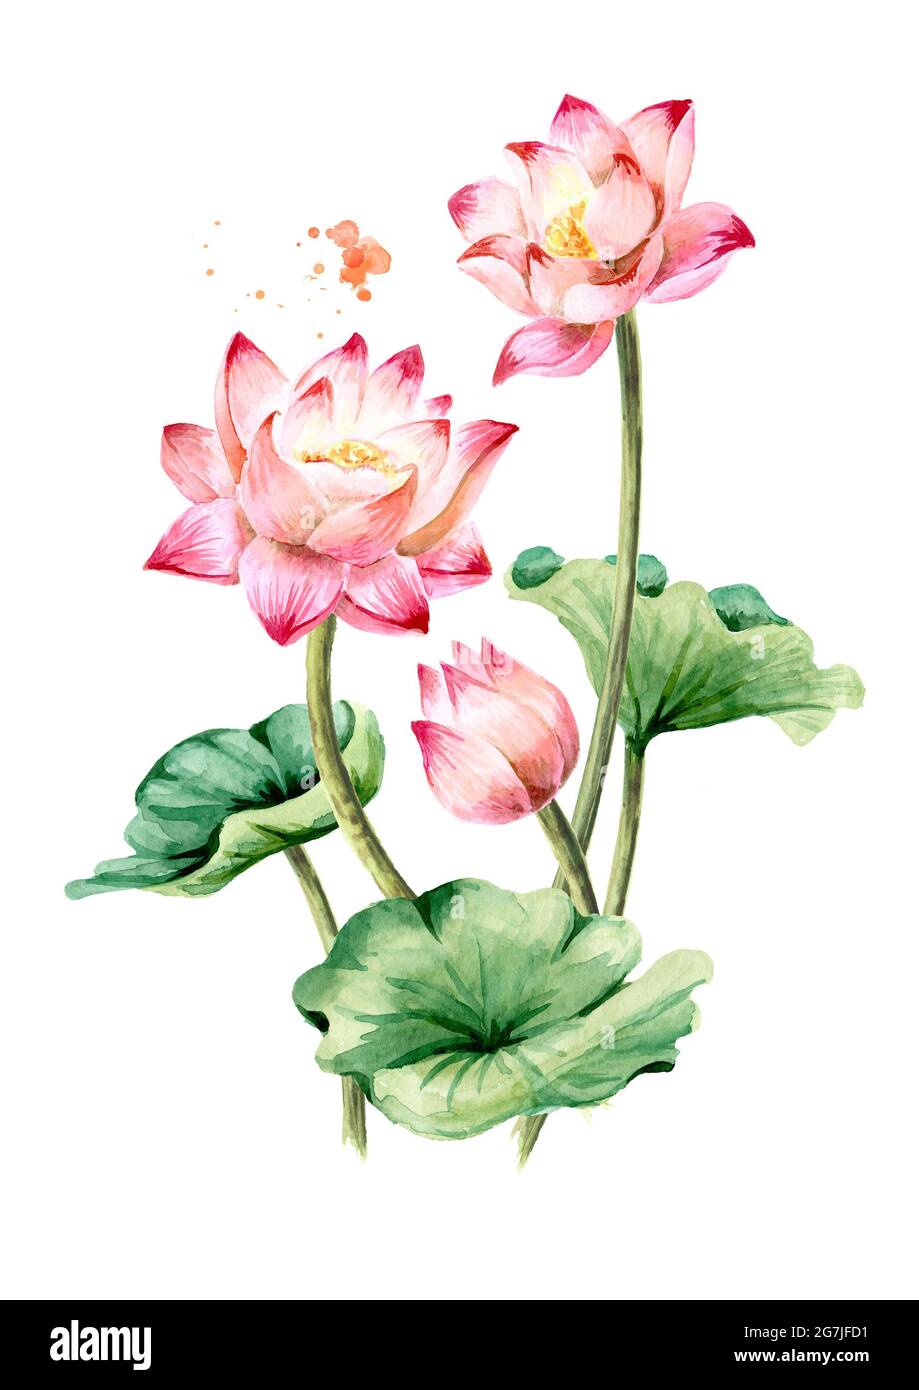 Bouquet of beautiful pink Lotus flowers with green leaves. Hand drawn  botanical watercolor illustration, isolated on white background Stock Photo  - Alamy